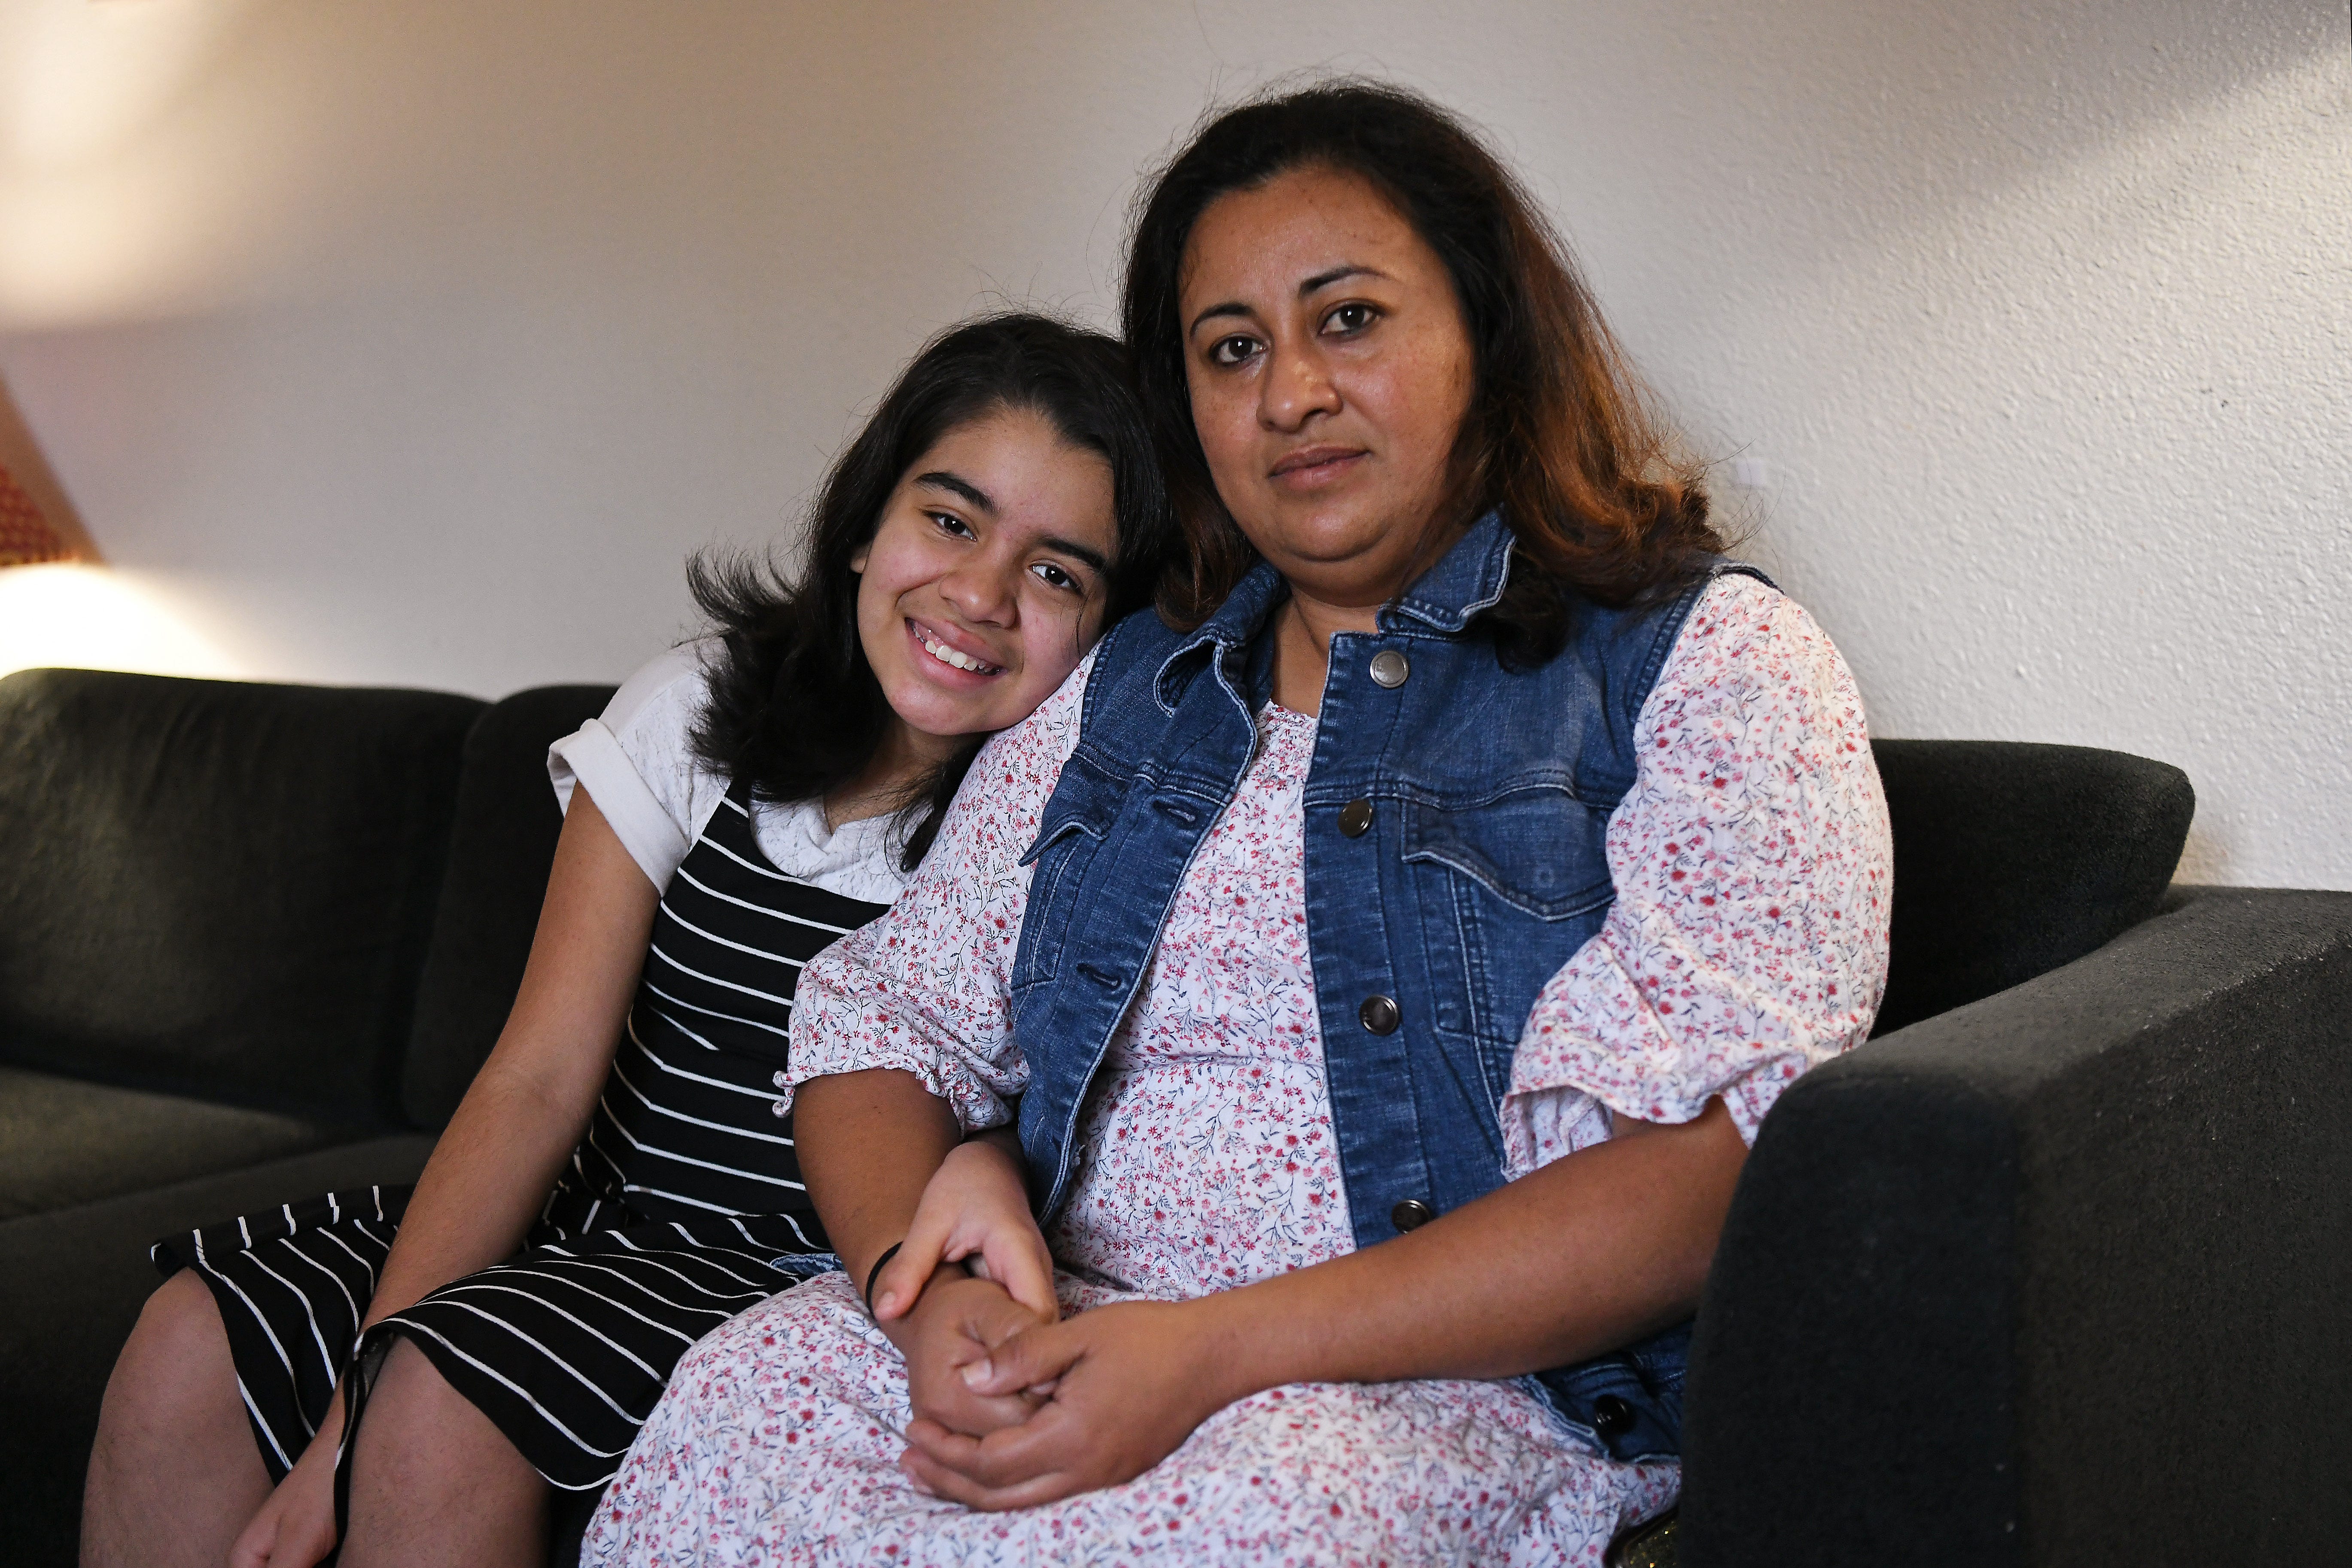 Aleida Susset Ramirez, 41, of Concord, sits with her daughter Emily, 11, at their home in Concord, Calif., on Monday, Nov. 9, 2020.